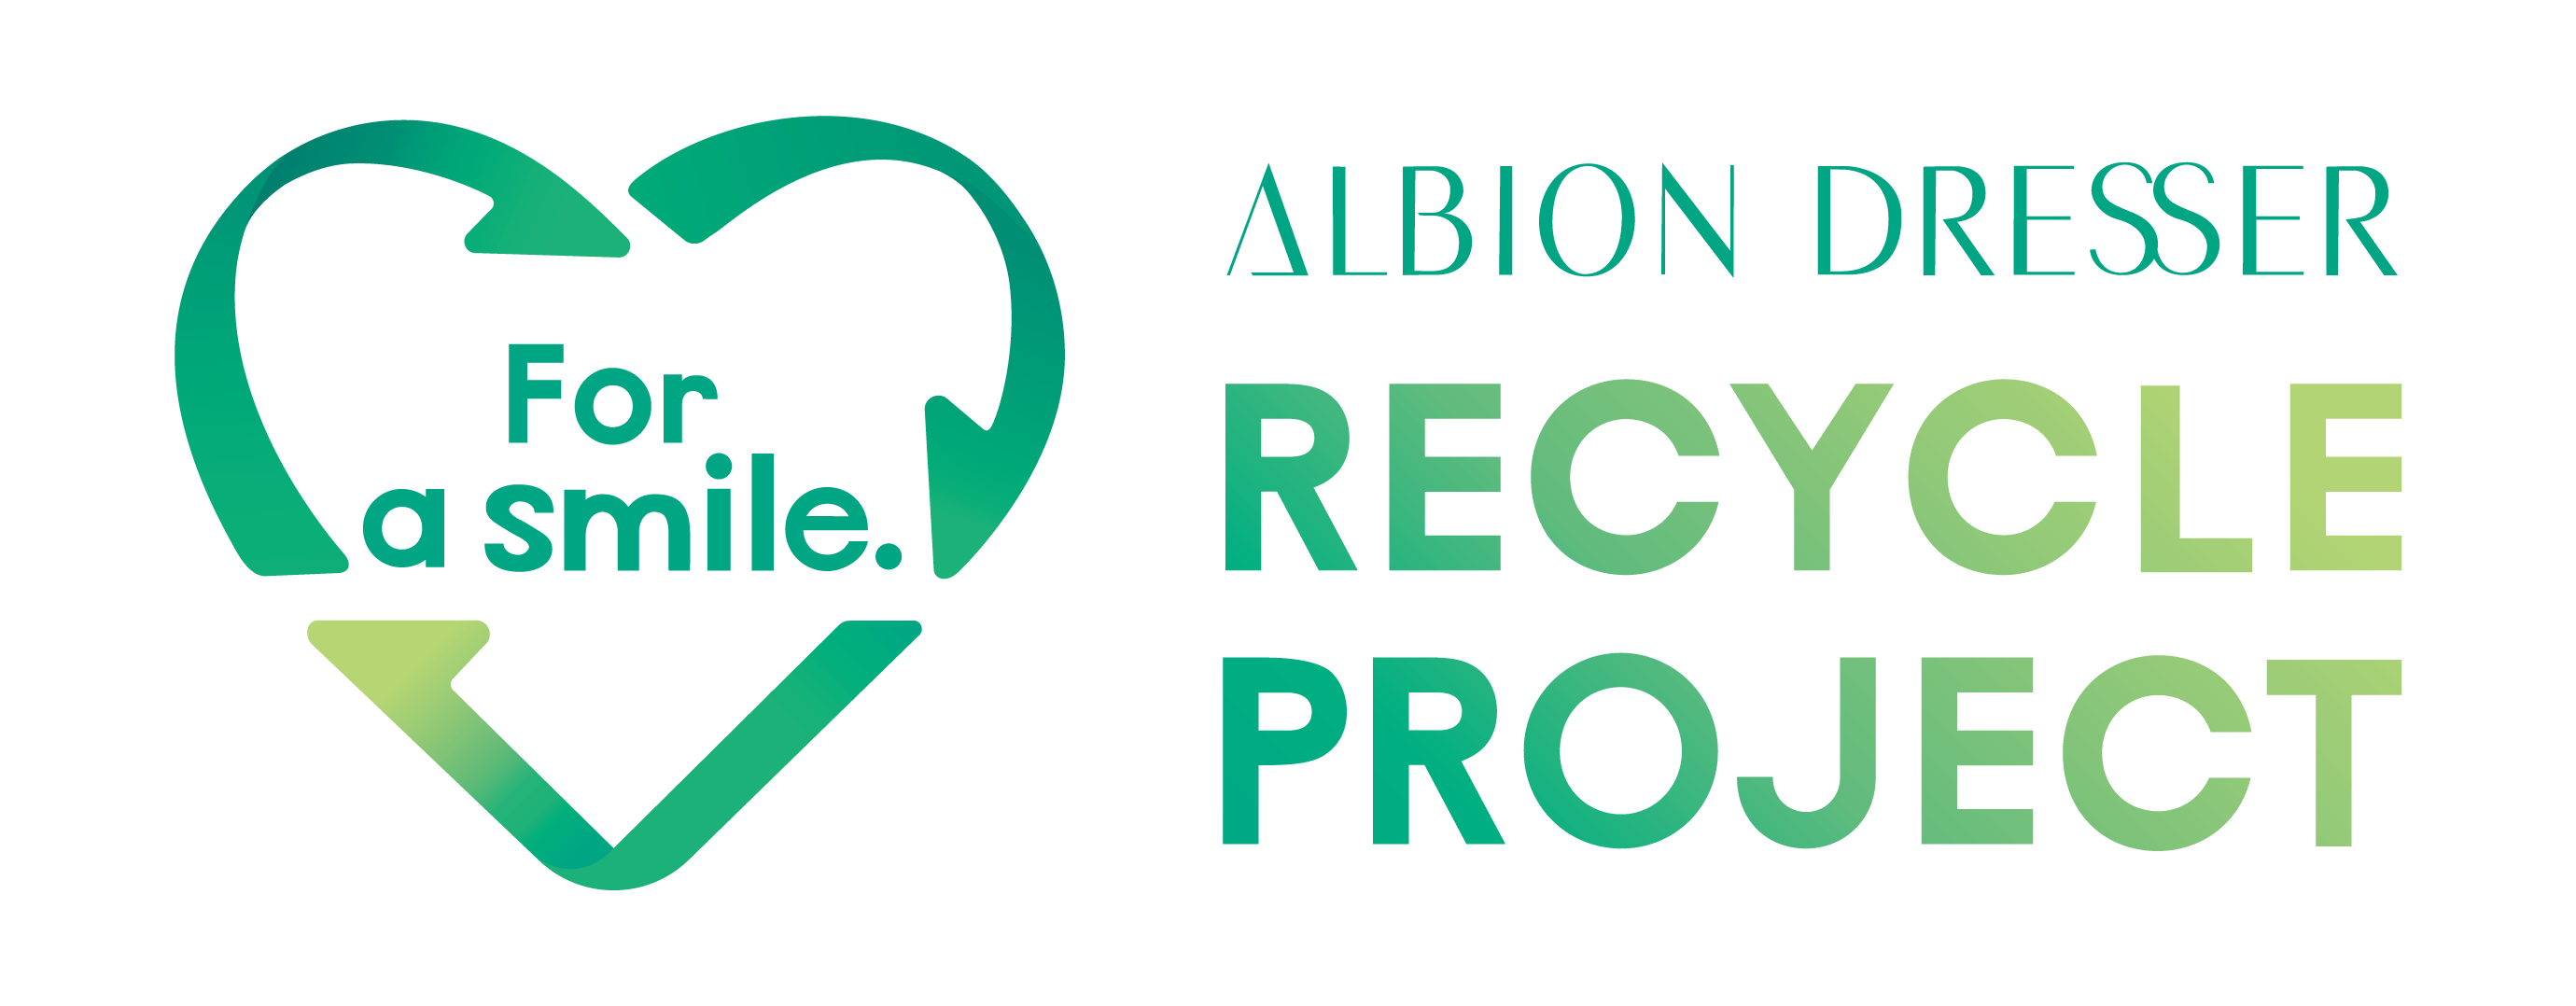 ALBION DRESSER RECYCLE PROJECT